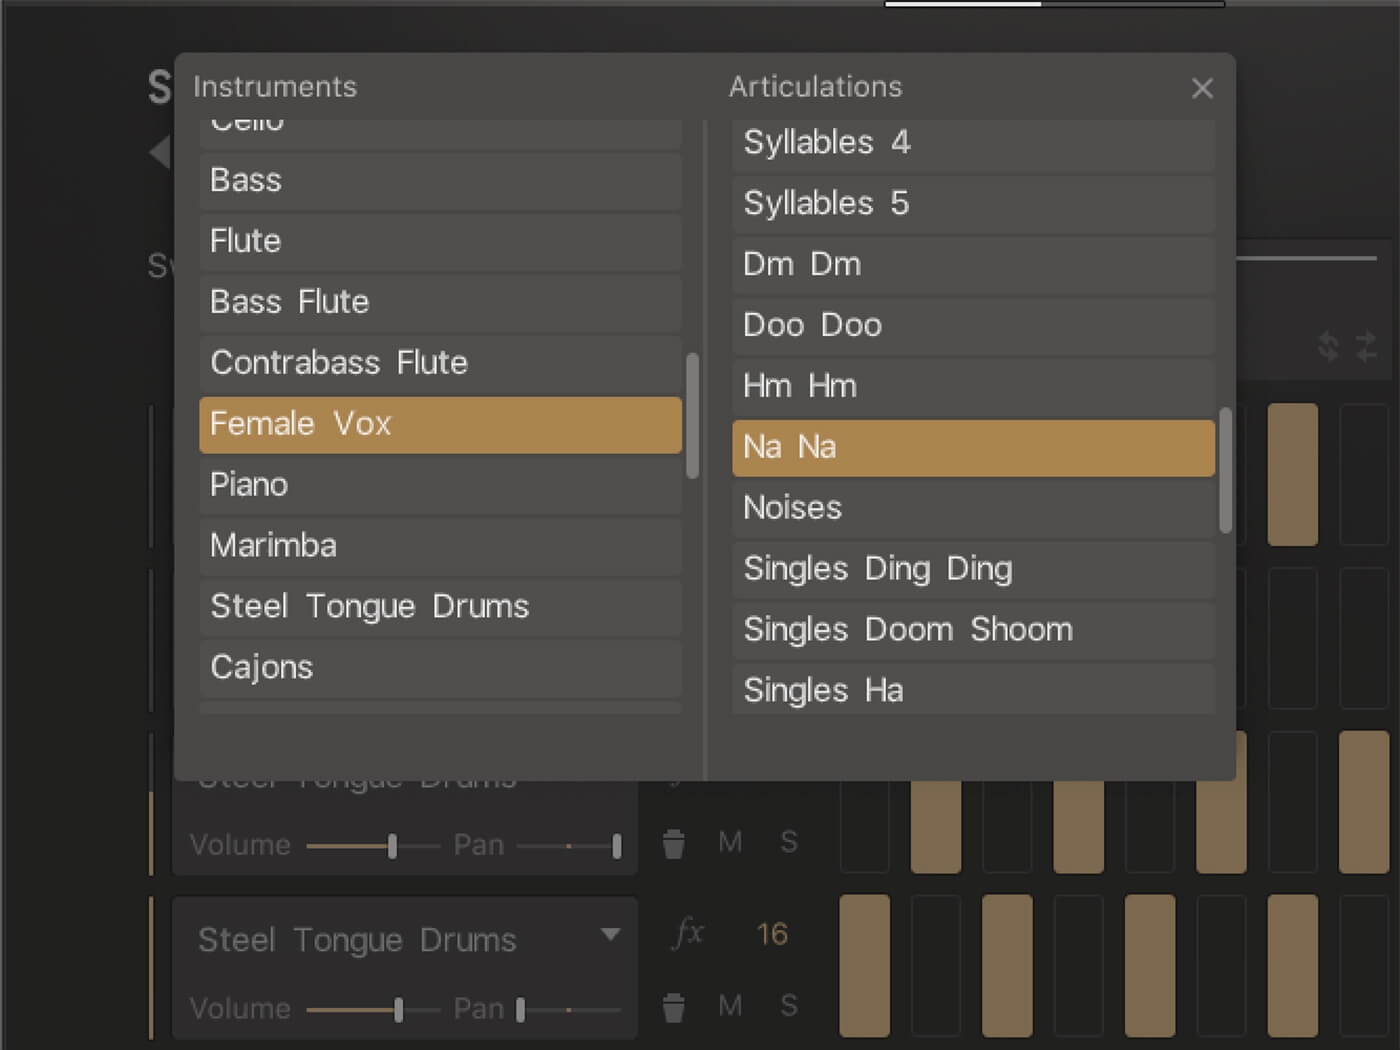 Native Instruments / Orchestral Tools Sequis